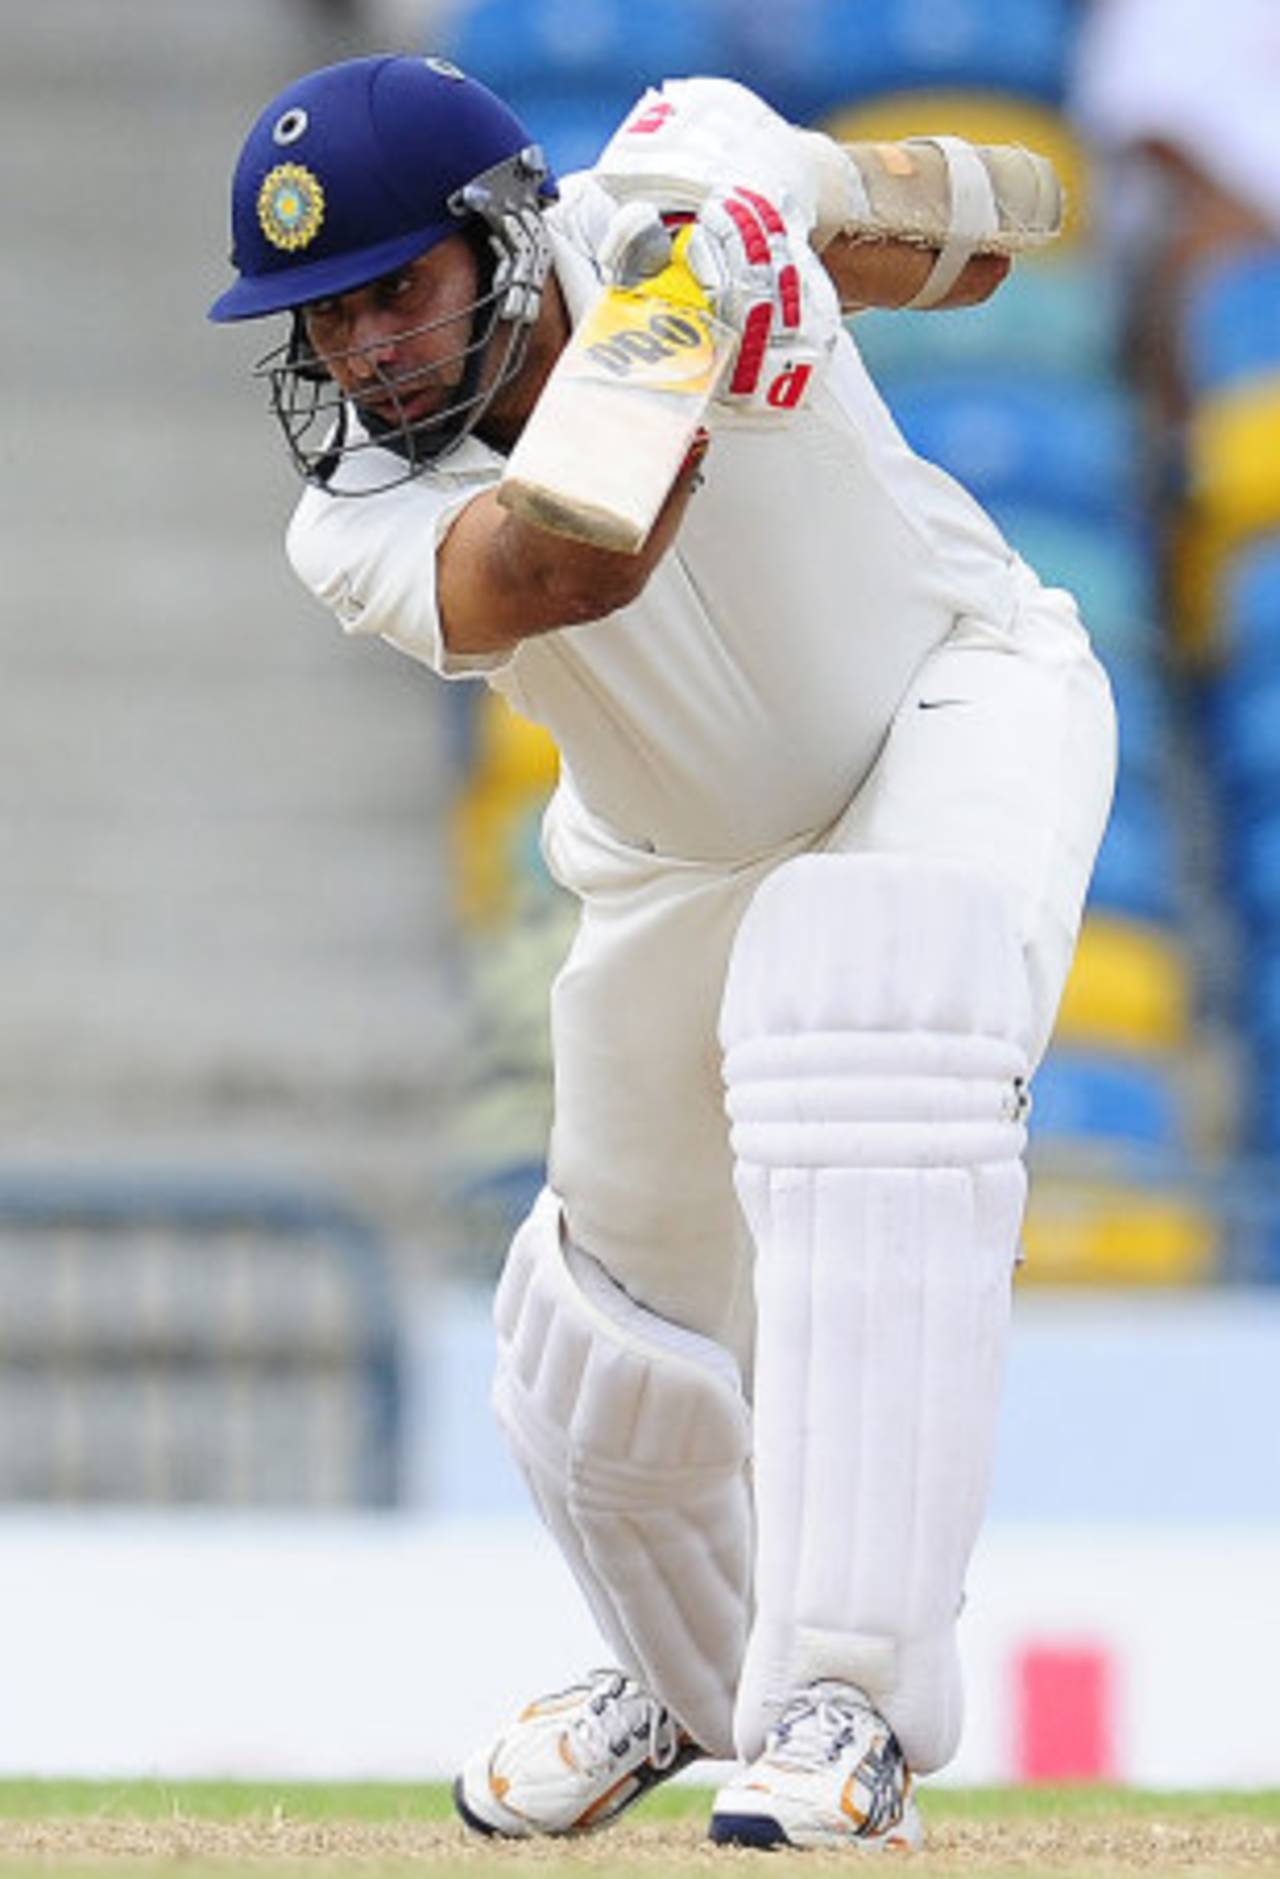 VVS Laxman leans into a drive, West Indies v India, 2nd Test, Bridgetown, 4th day, July 1, 2011 